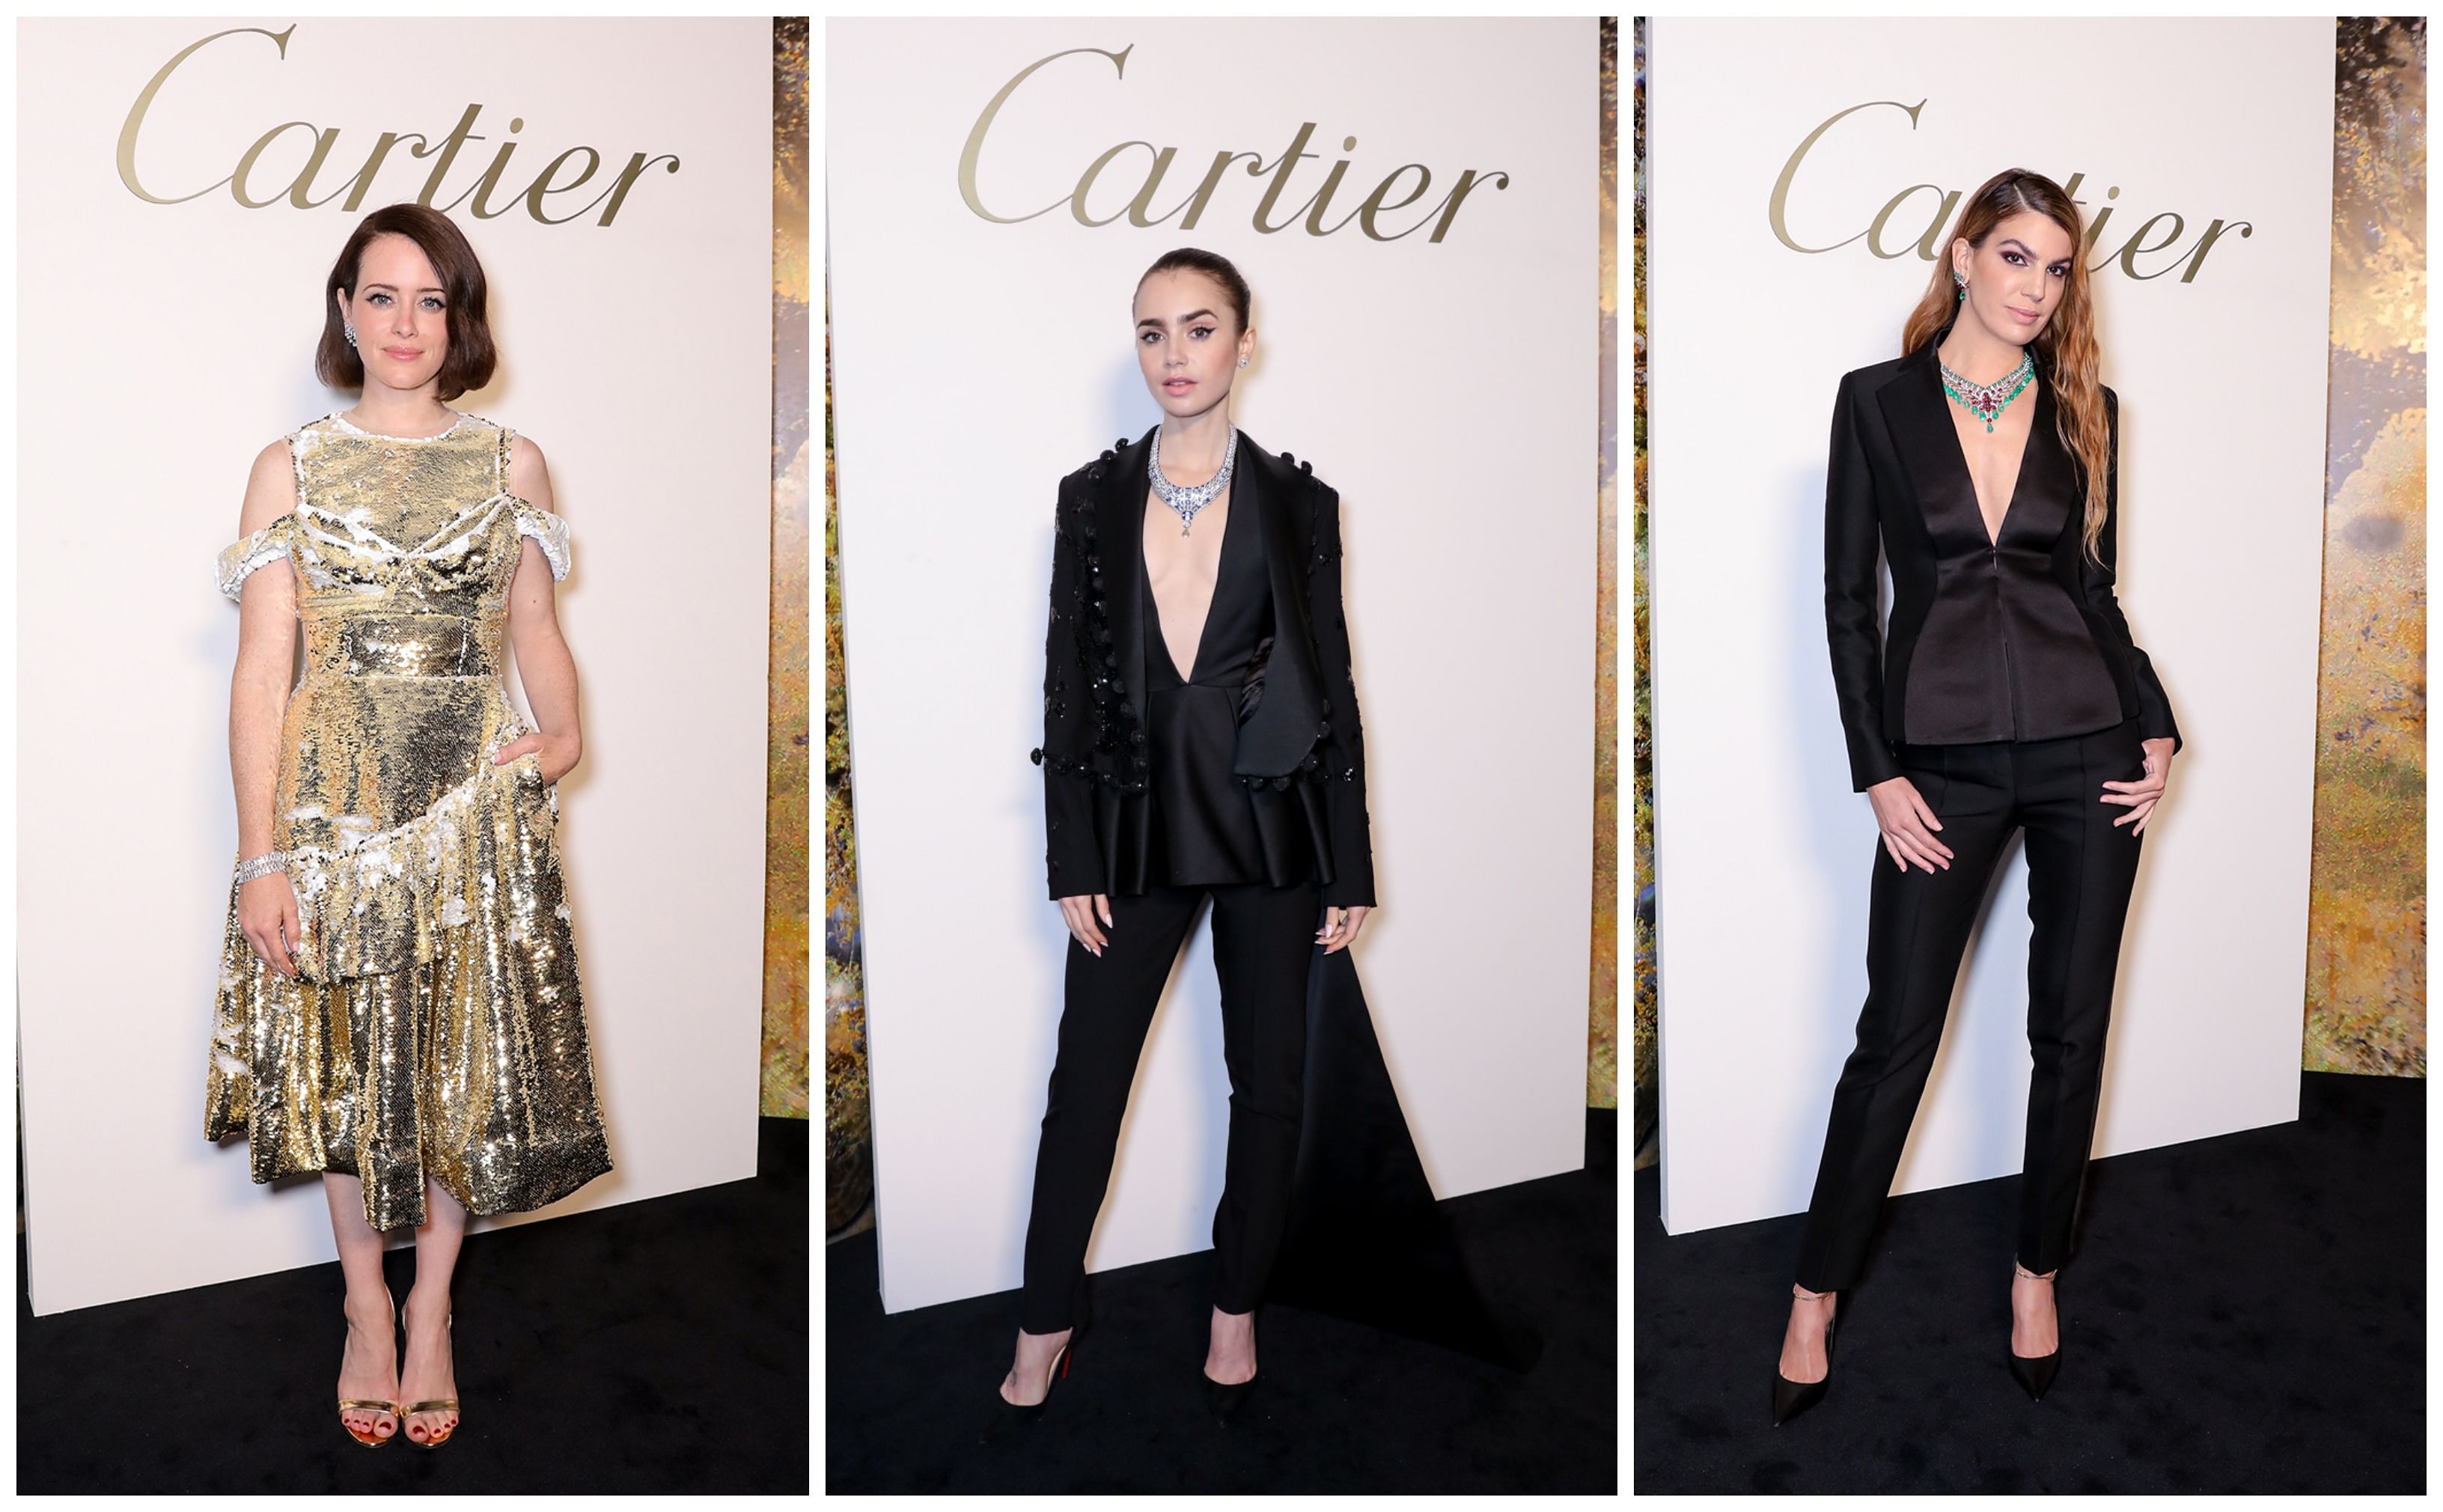 Cartier, High Jewellery, Magnitude, London, launch party, celebrities